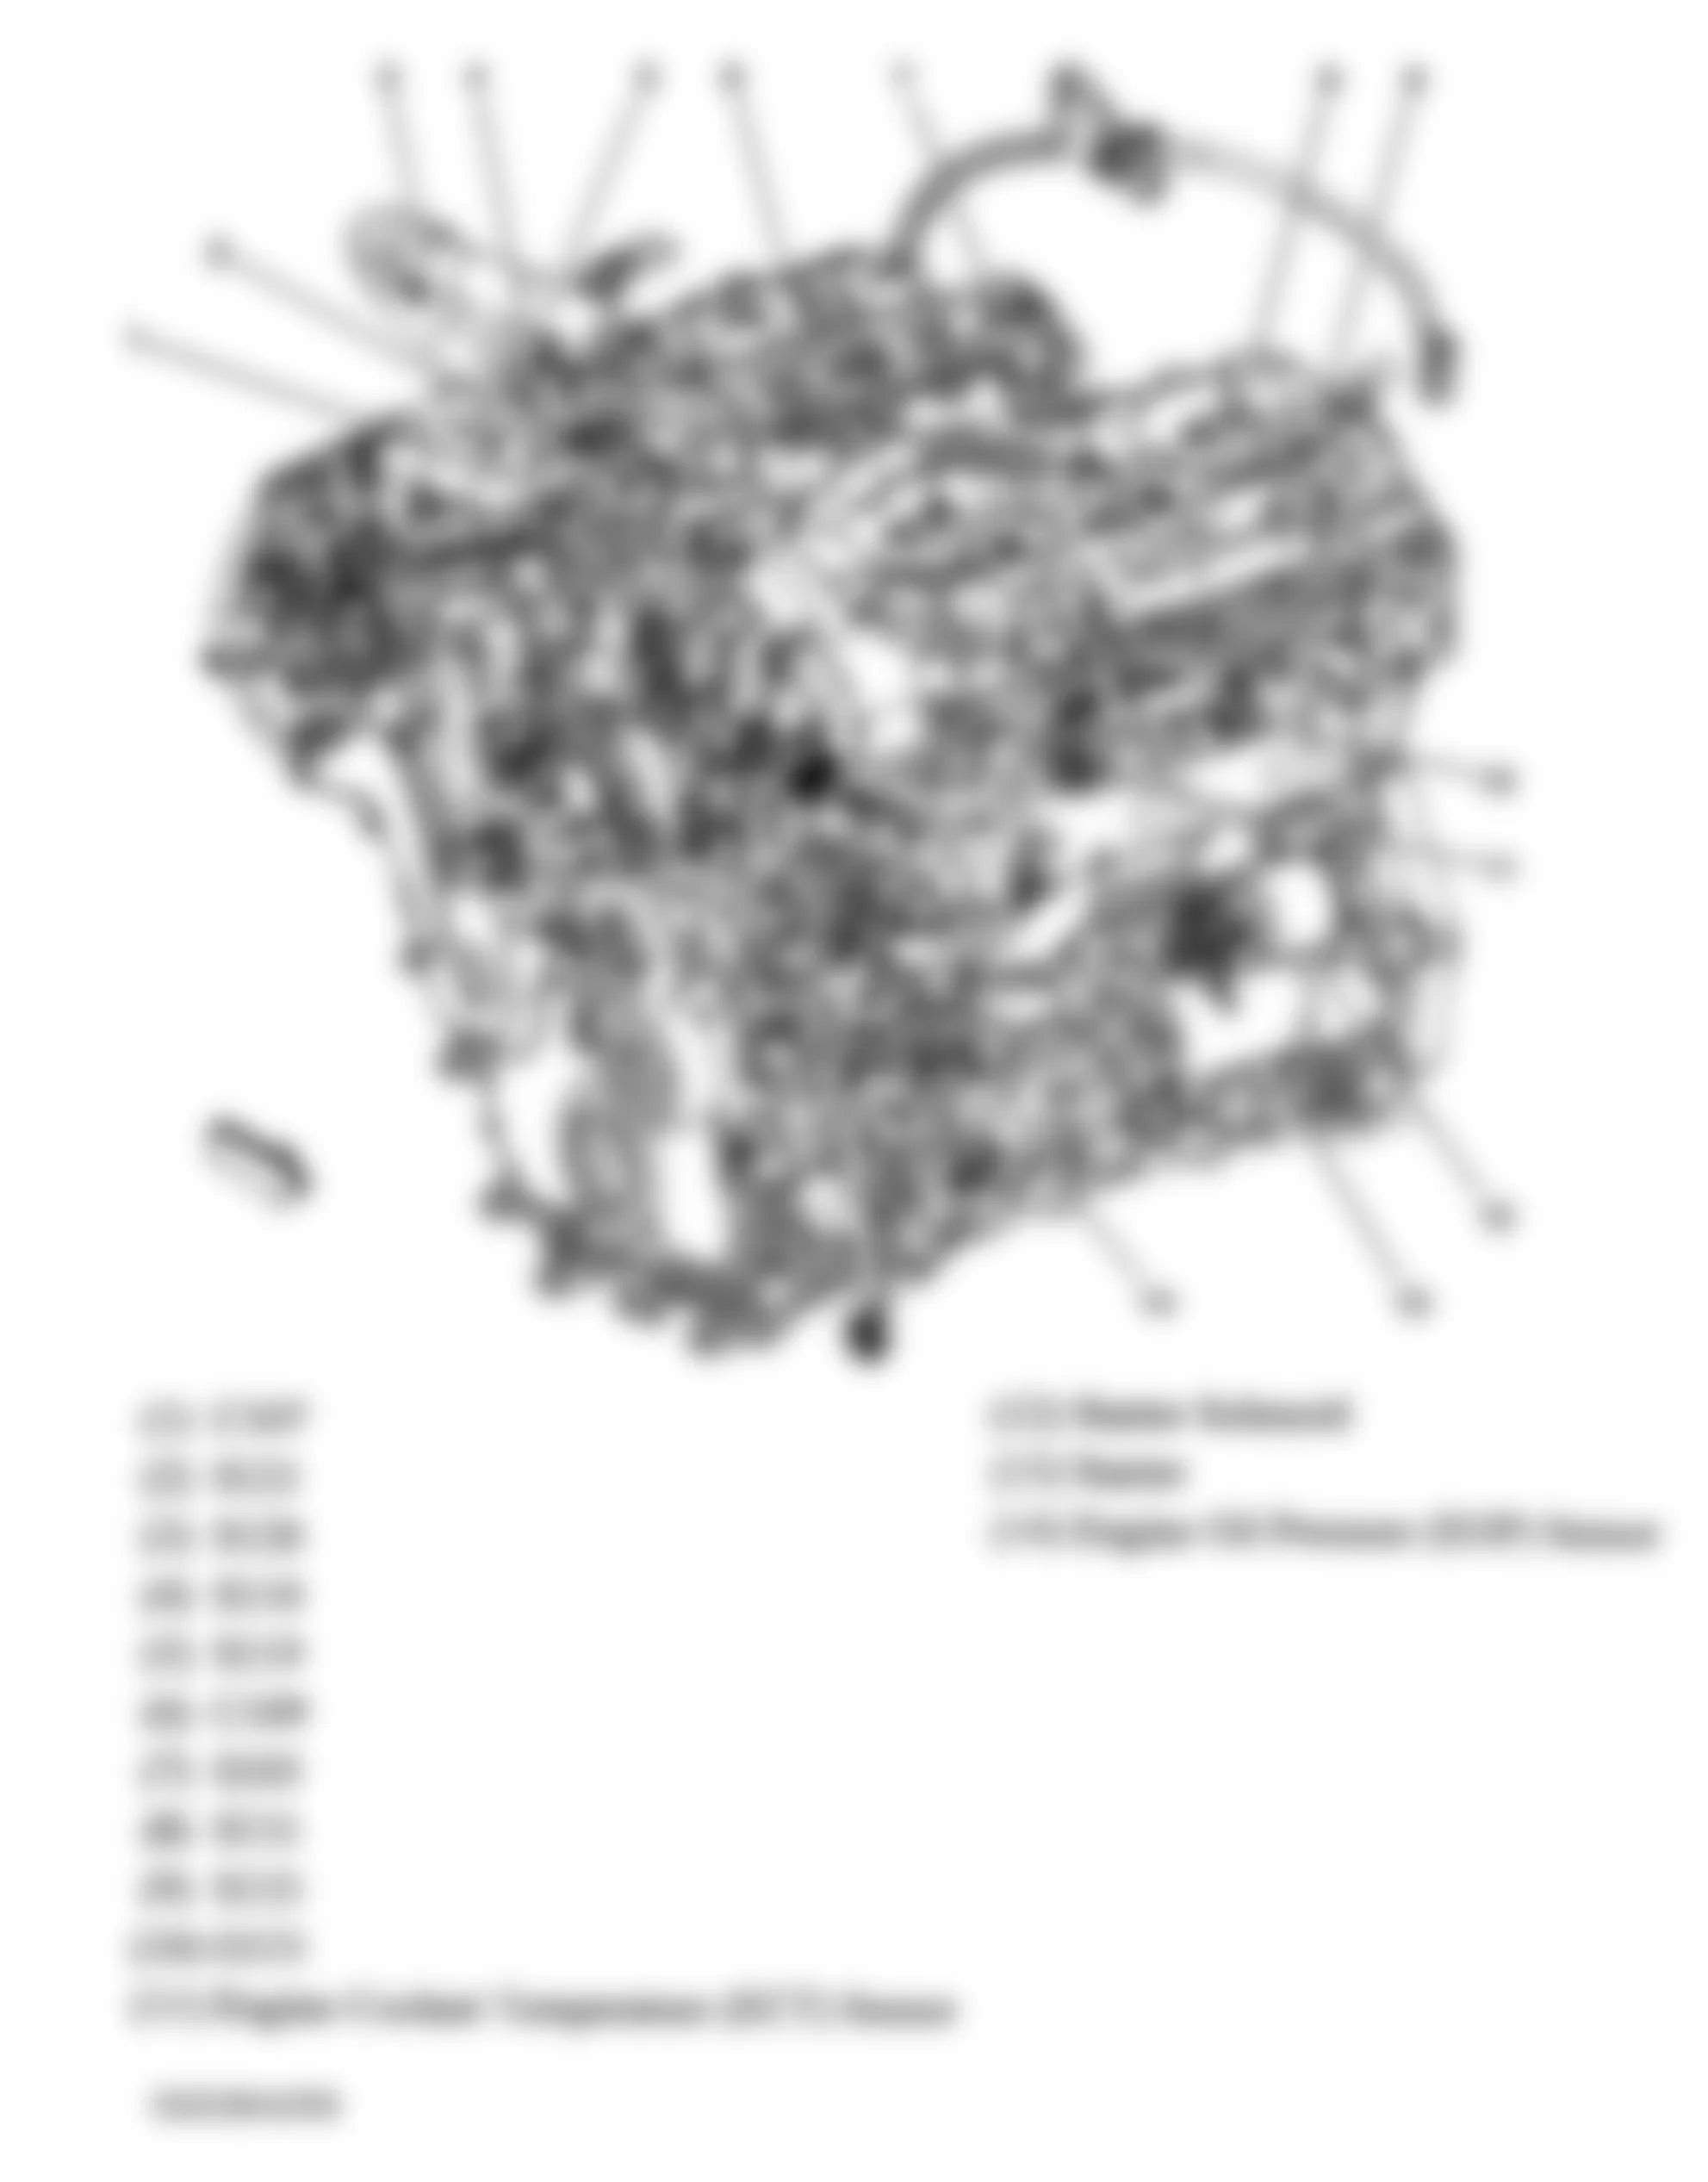 Buick Allure CXS 2005 - Component Locations -  Front Of Engine (3.6L)